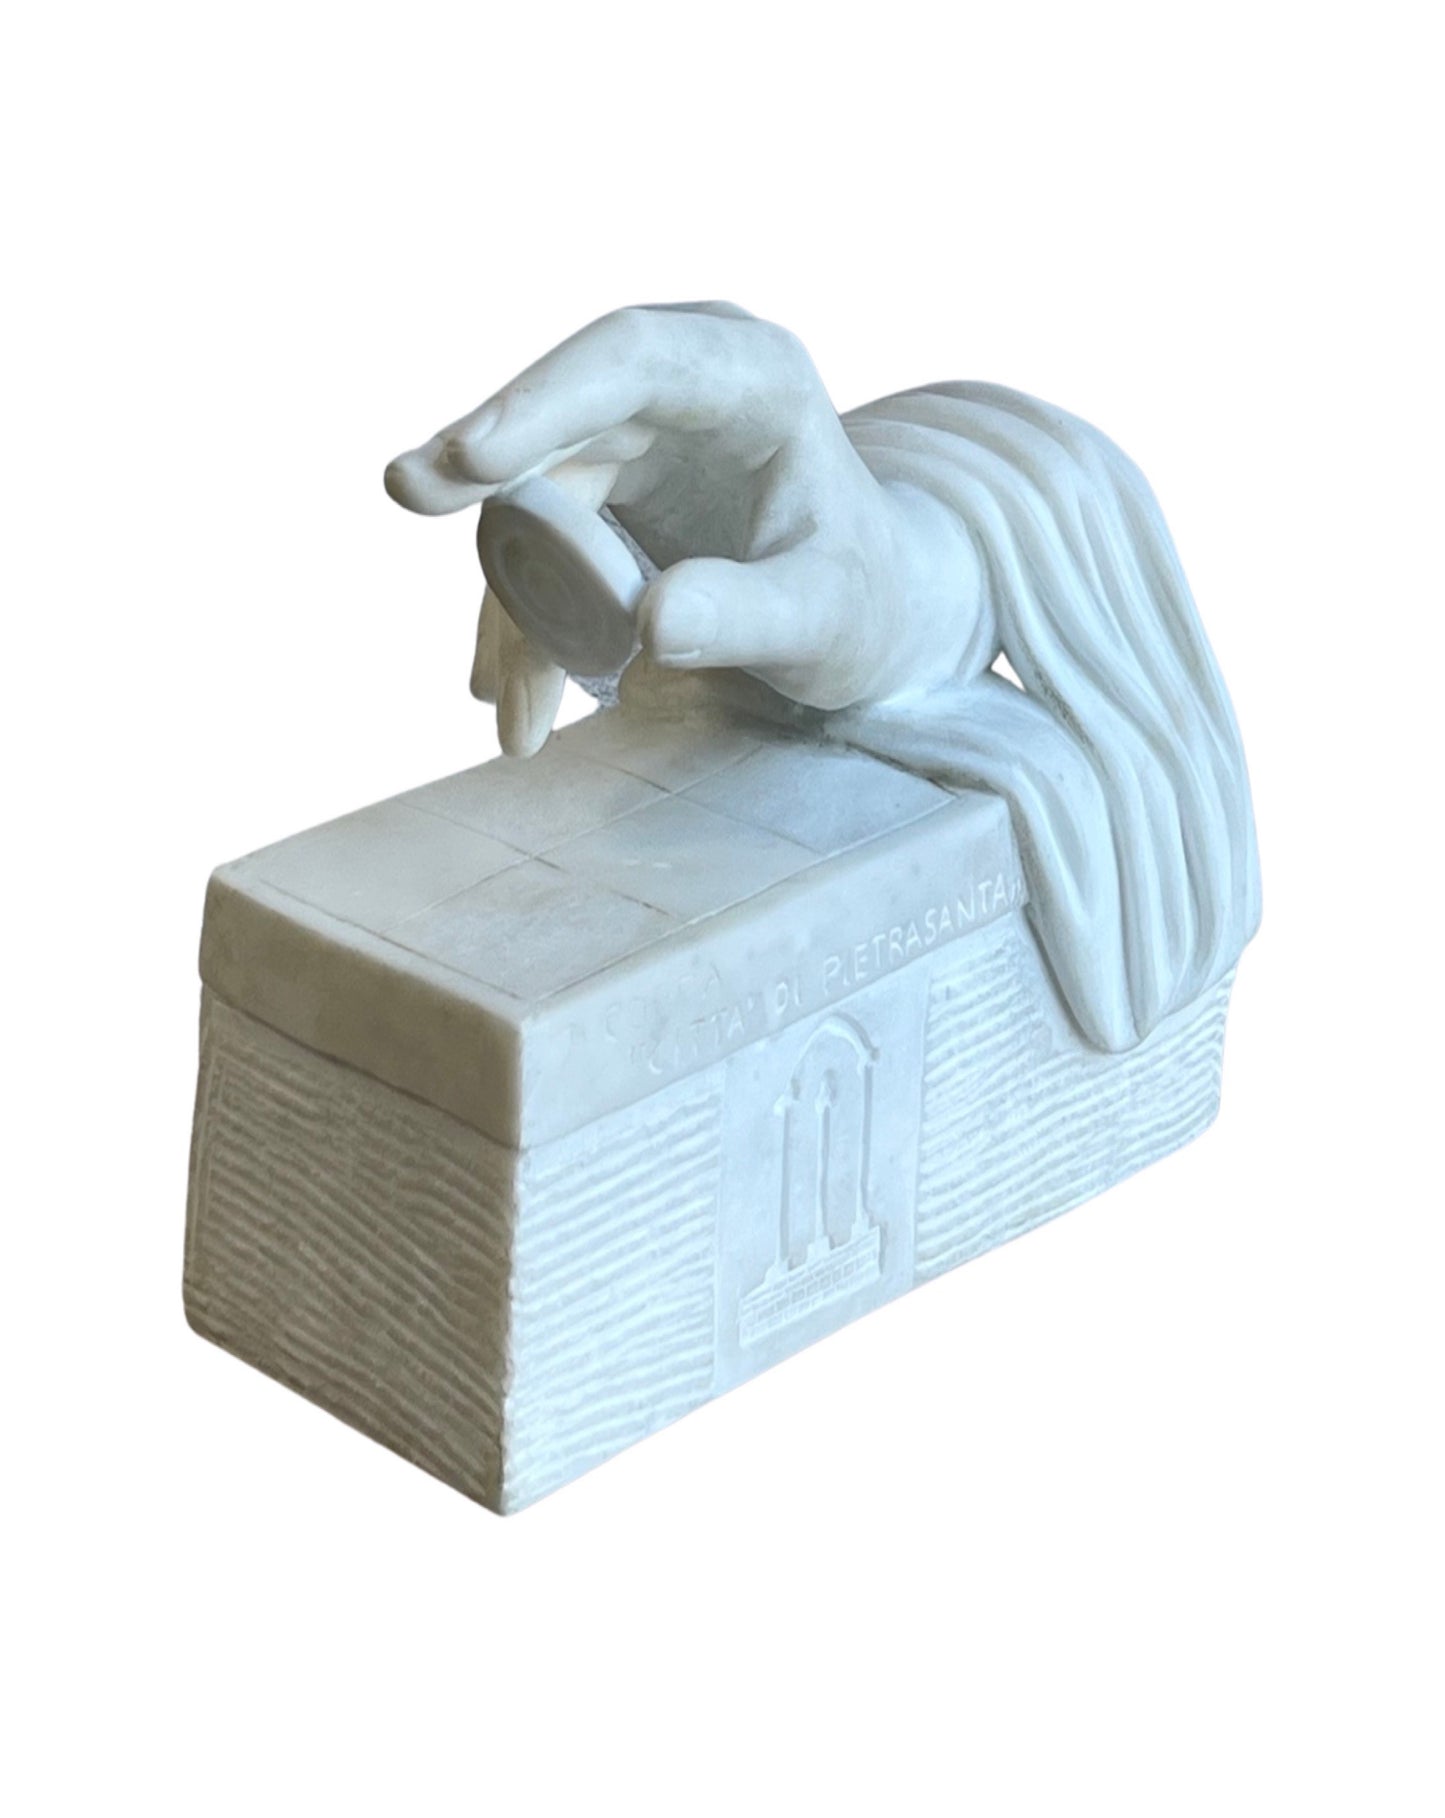 Carrara White Marble Hand Carved Sculpture, 1970s